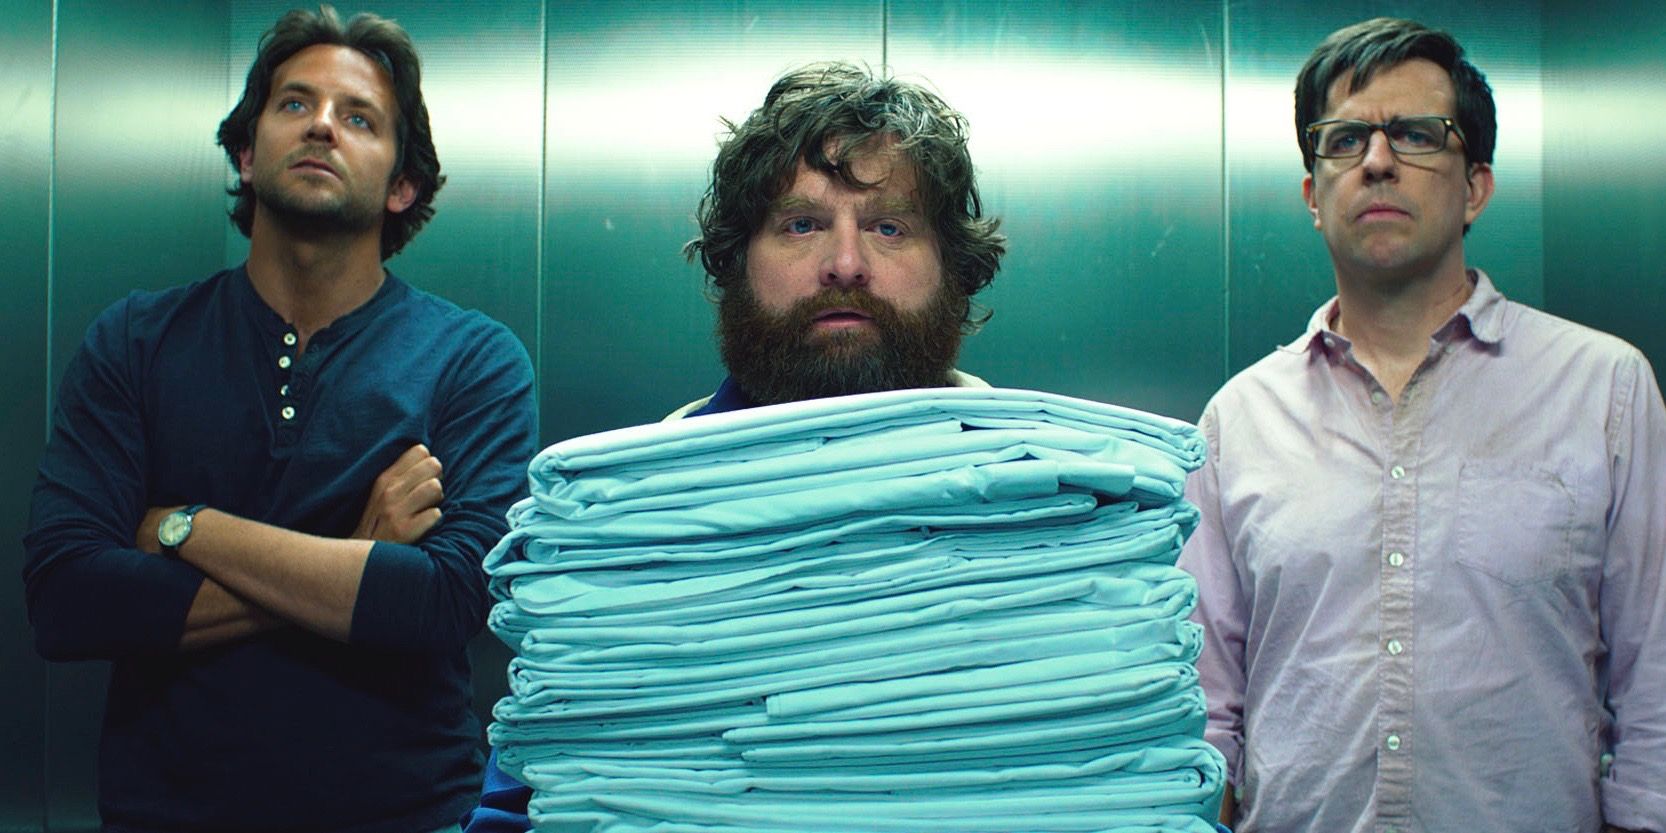 Phil Alan and Stu in The Hangover Part III 3